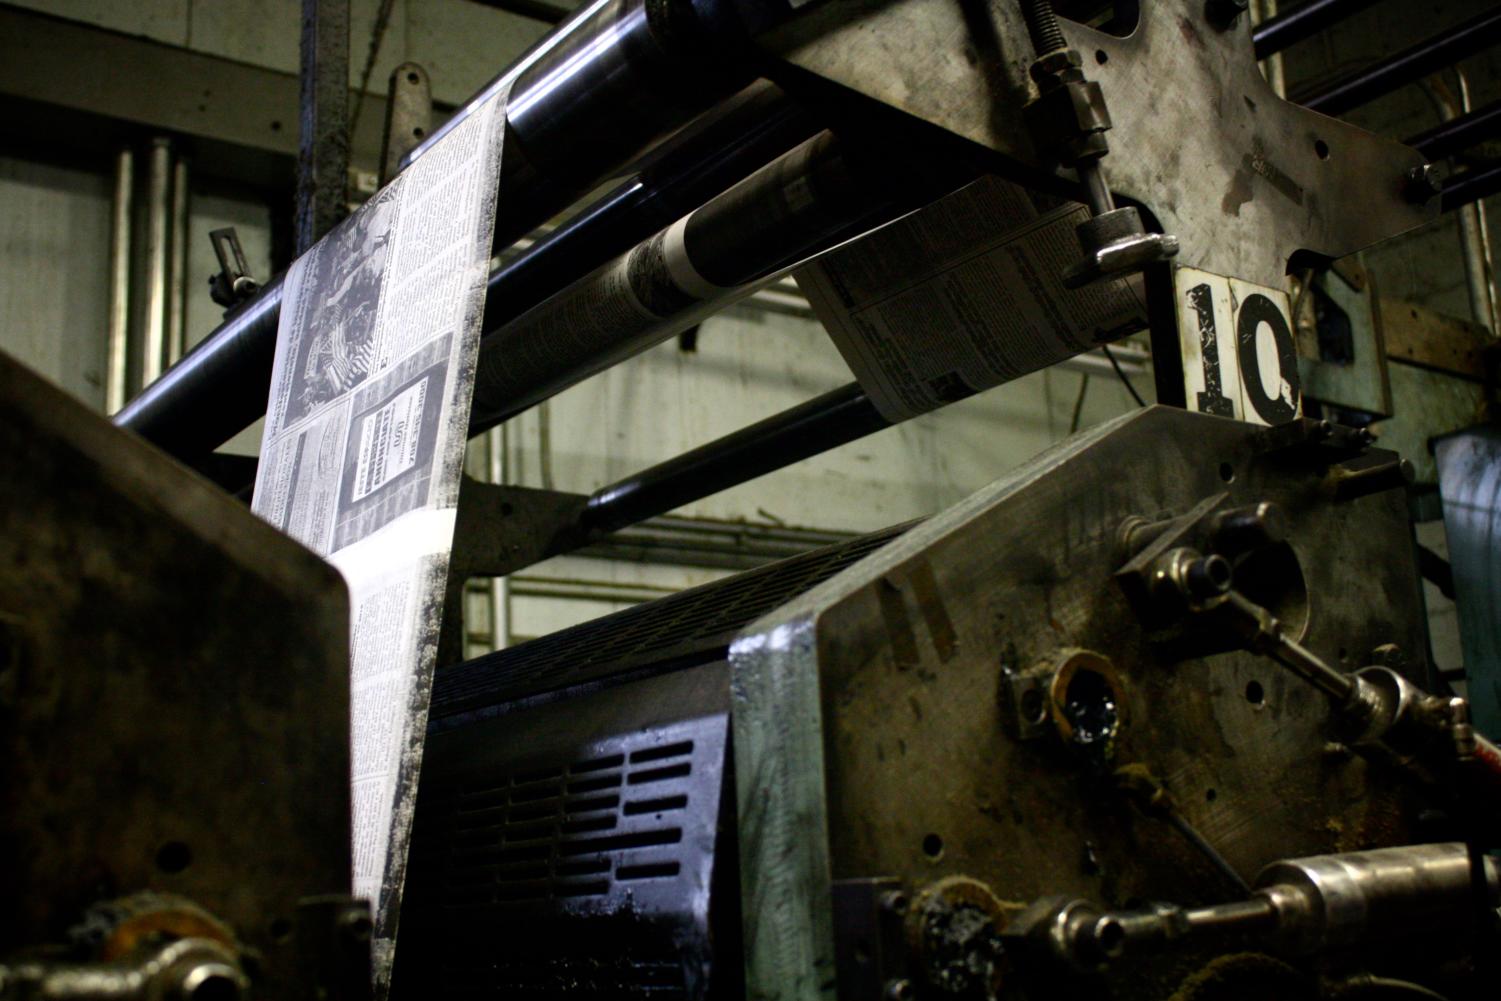 Another view of the printing machinery. After the plate has been inked, it presses against a rubber blanket, transferring the ink to it.